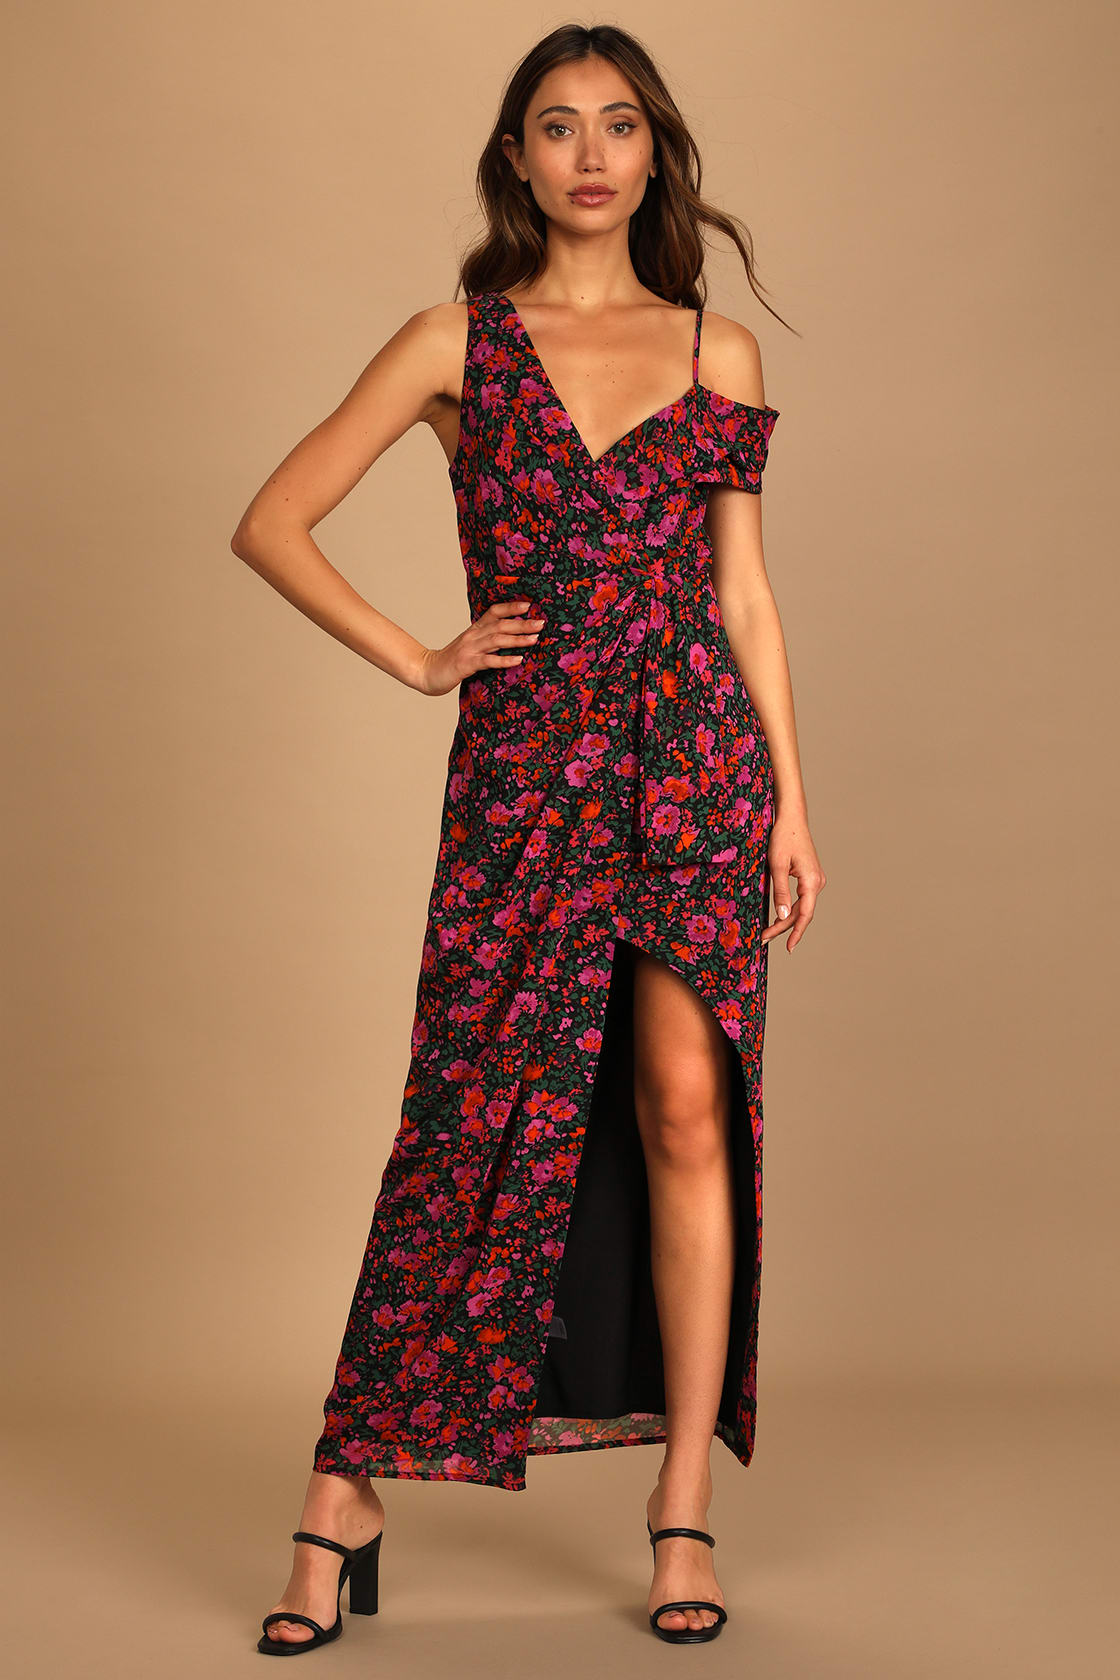 Black and Red Floral Off the Shoulder Sexy Cute Fall Wedding Guest Dress Under $100